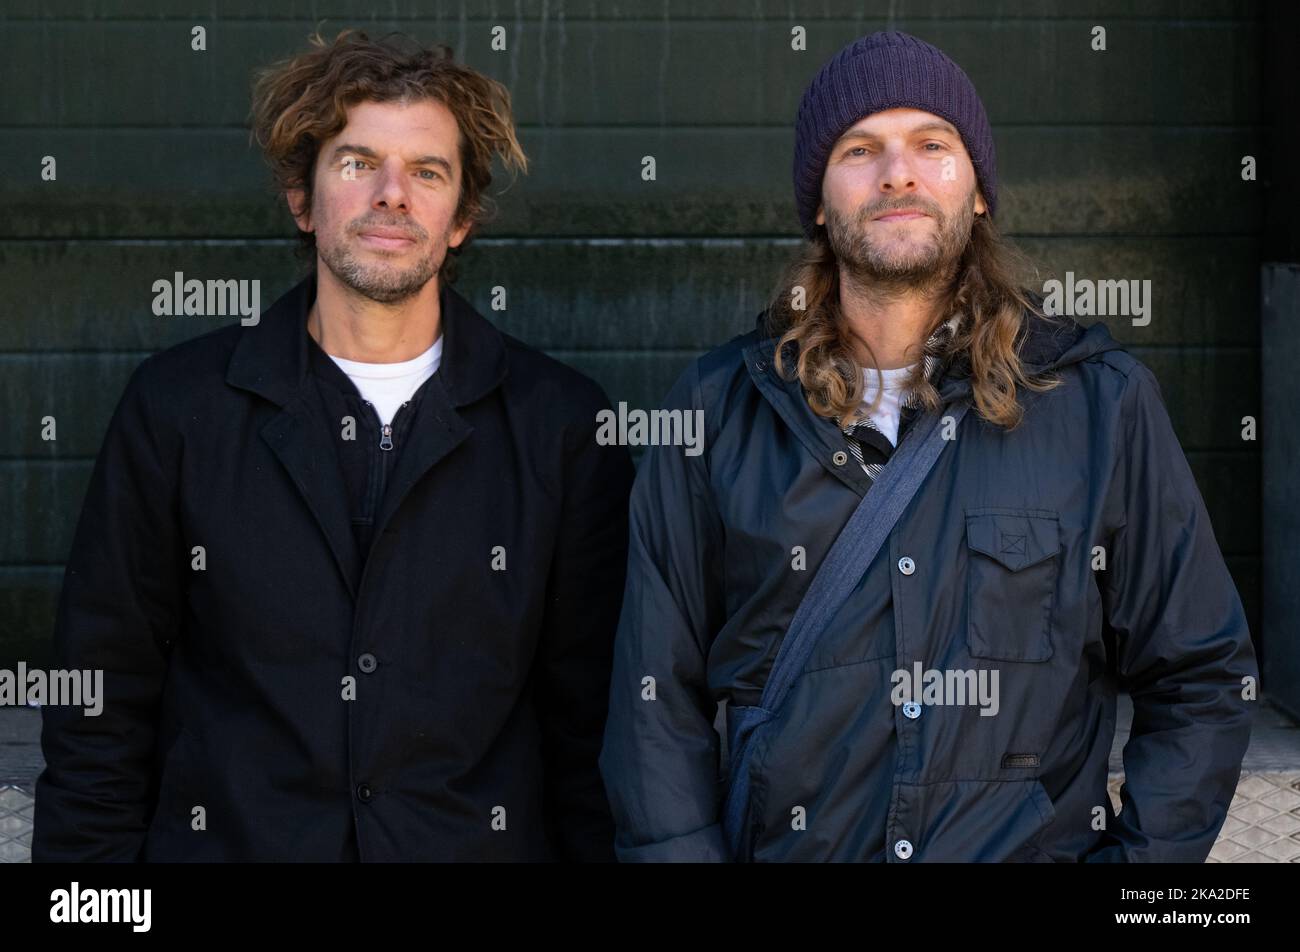 Munich, Germany. 31st Oct, 2022. Peter Brugger (r), singer and guitarist, and Rüdiger 'Rüde' Linhof, bassist, of the band Sportfreunde Stiller recorded during an interview. The band will release its eighth album, 'Jeder nur ein X,' on Nov. 11, 2022. Credit: Sven Hoppe/dpa/Alamy Live News Stock Photo